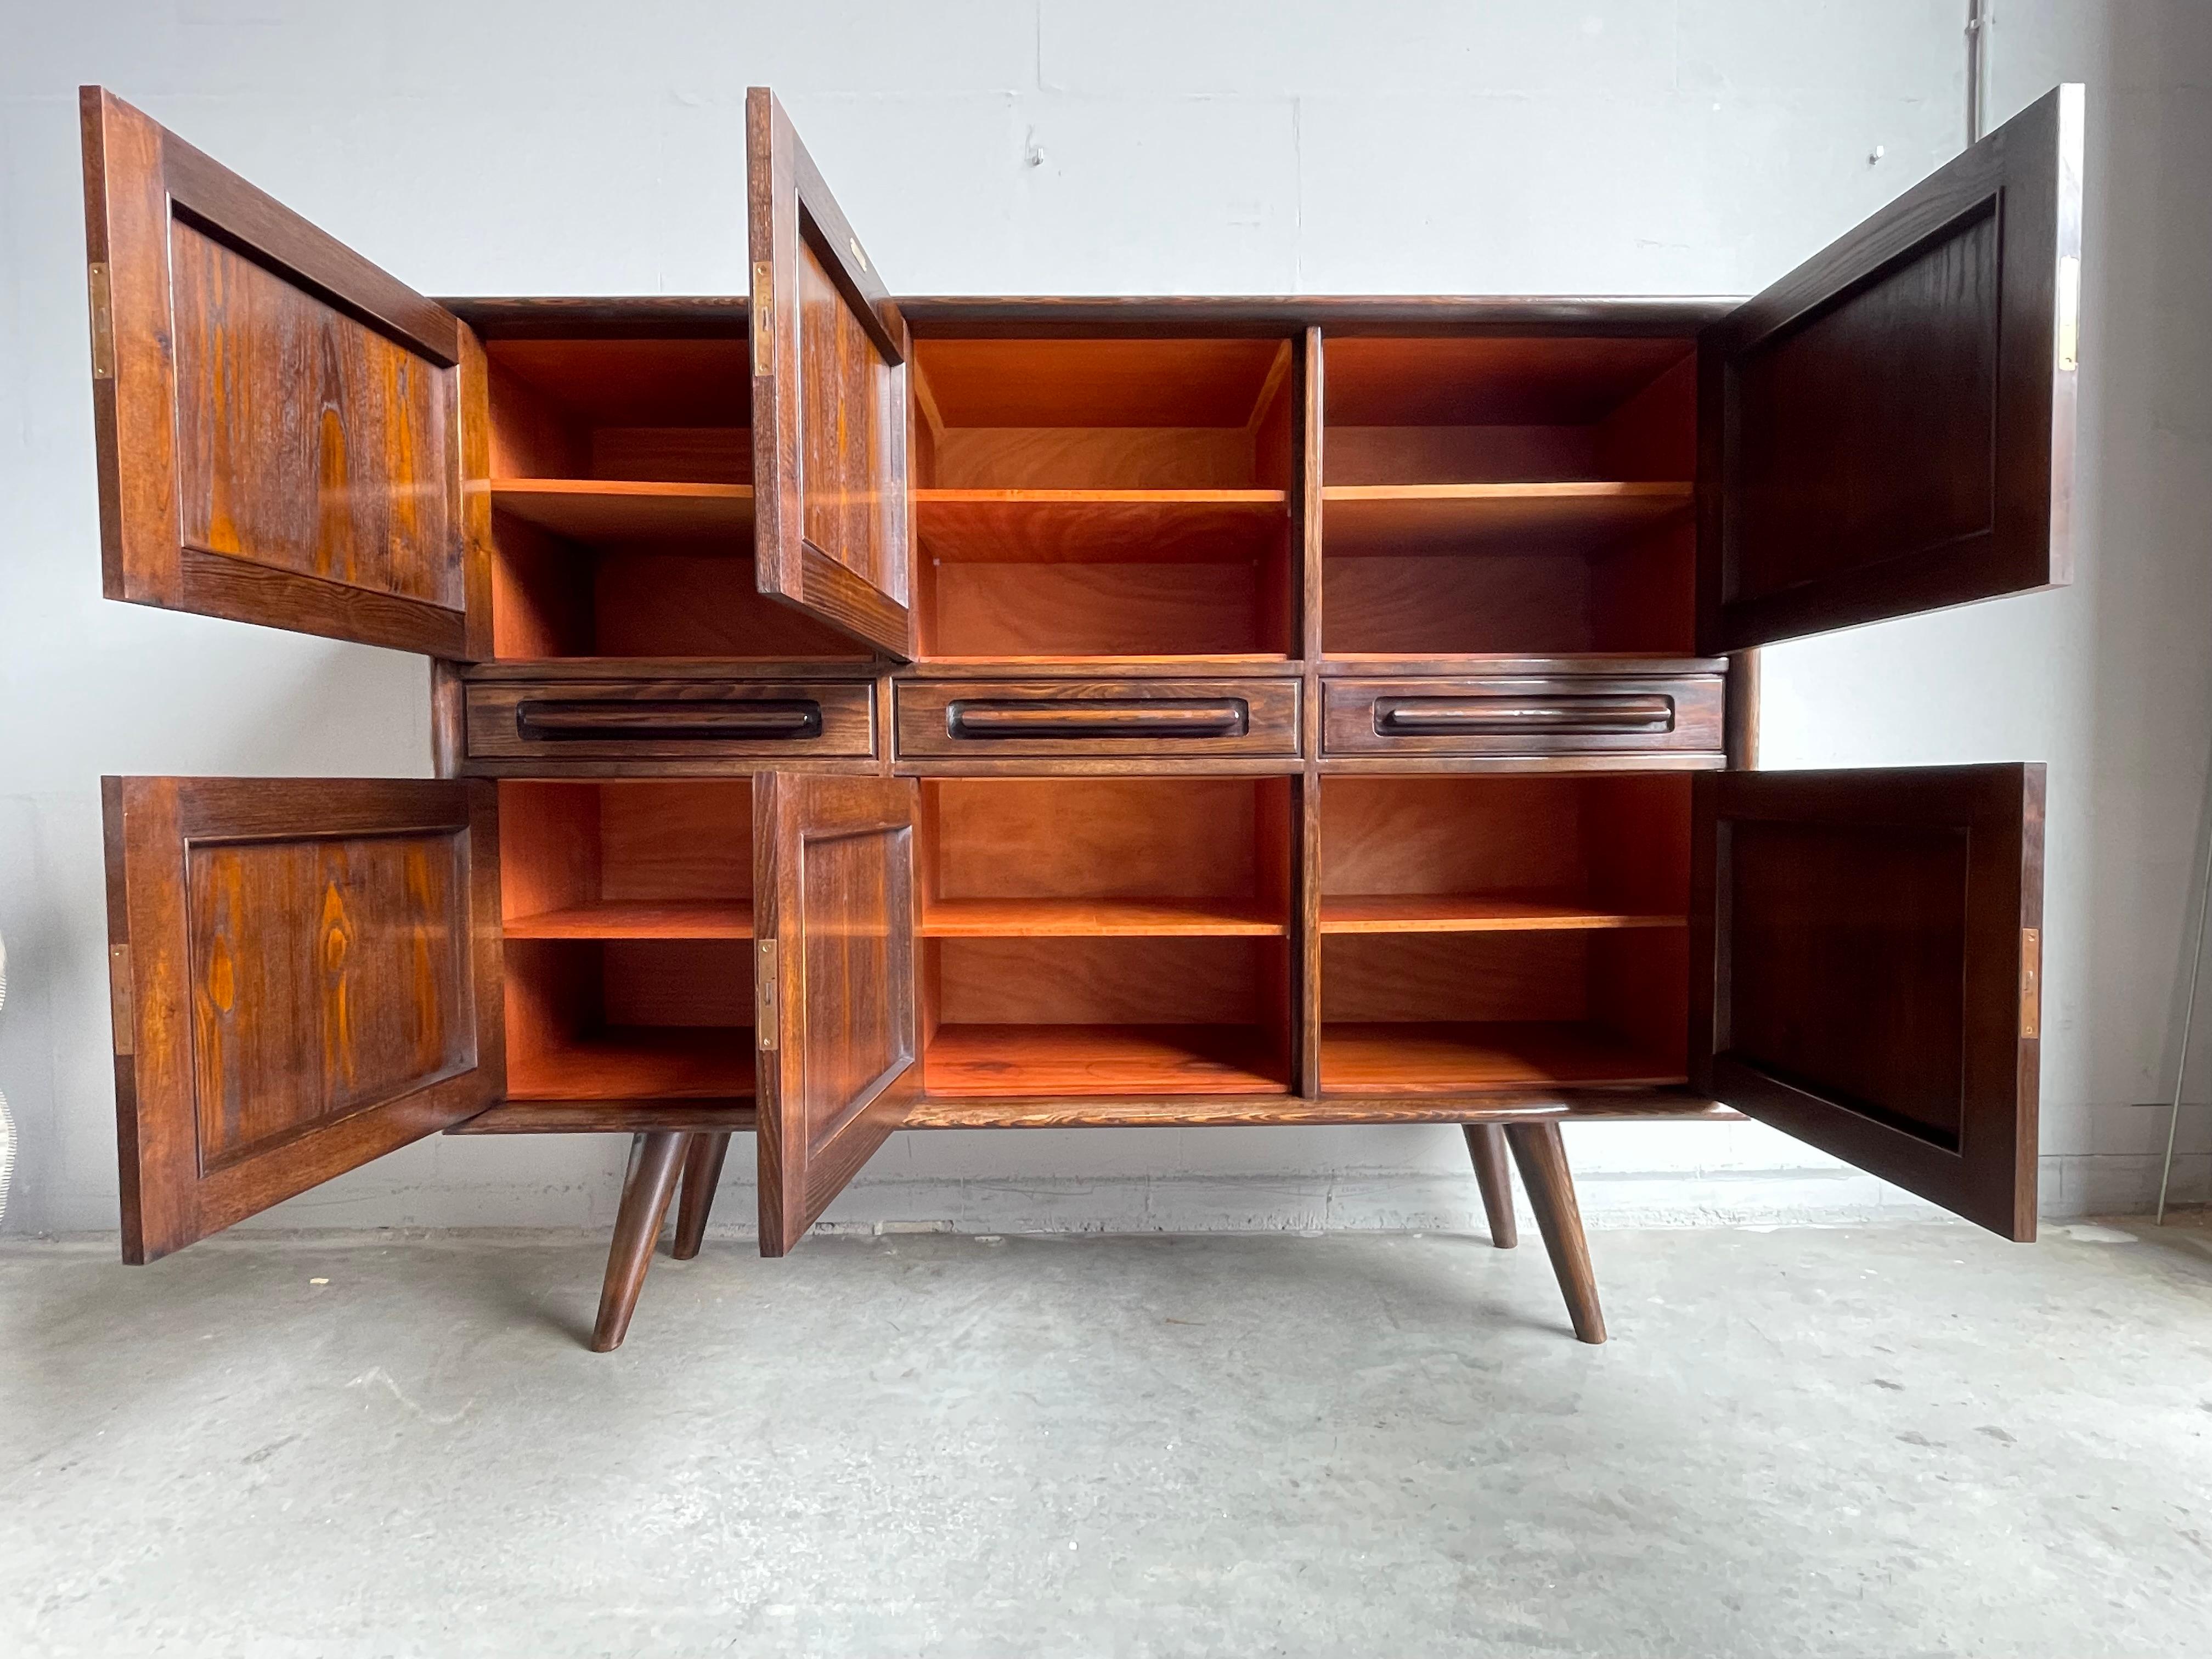 Rare Mid-Century Modern, oak and cherry wood, six doors and three drawers cabinet.

This rare credenza / sideboard by one of Holland's finest furniture makers of the early 1900s could very well be one of the first Midcentury Modern pieces that was